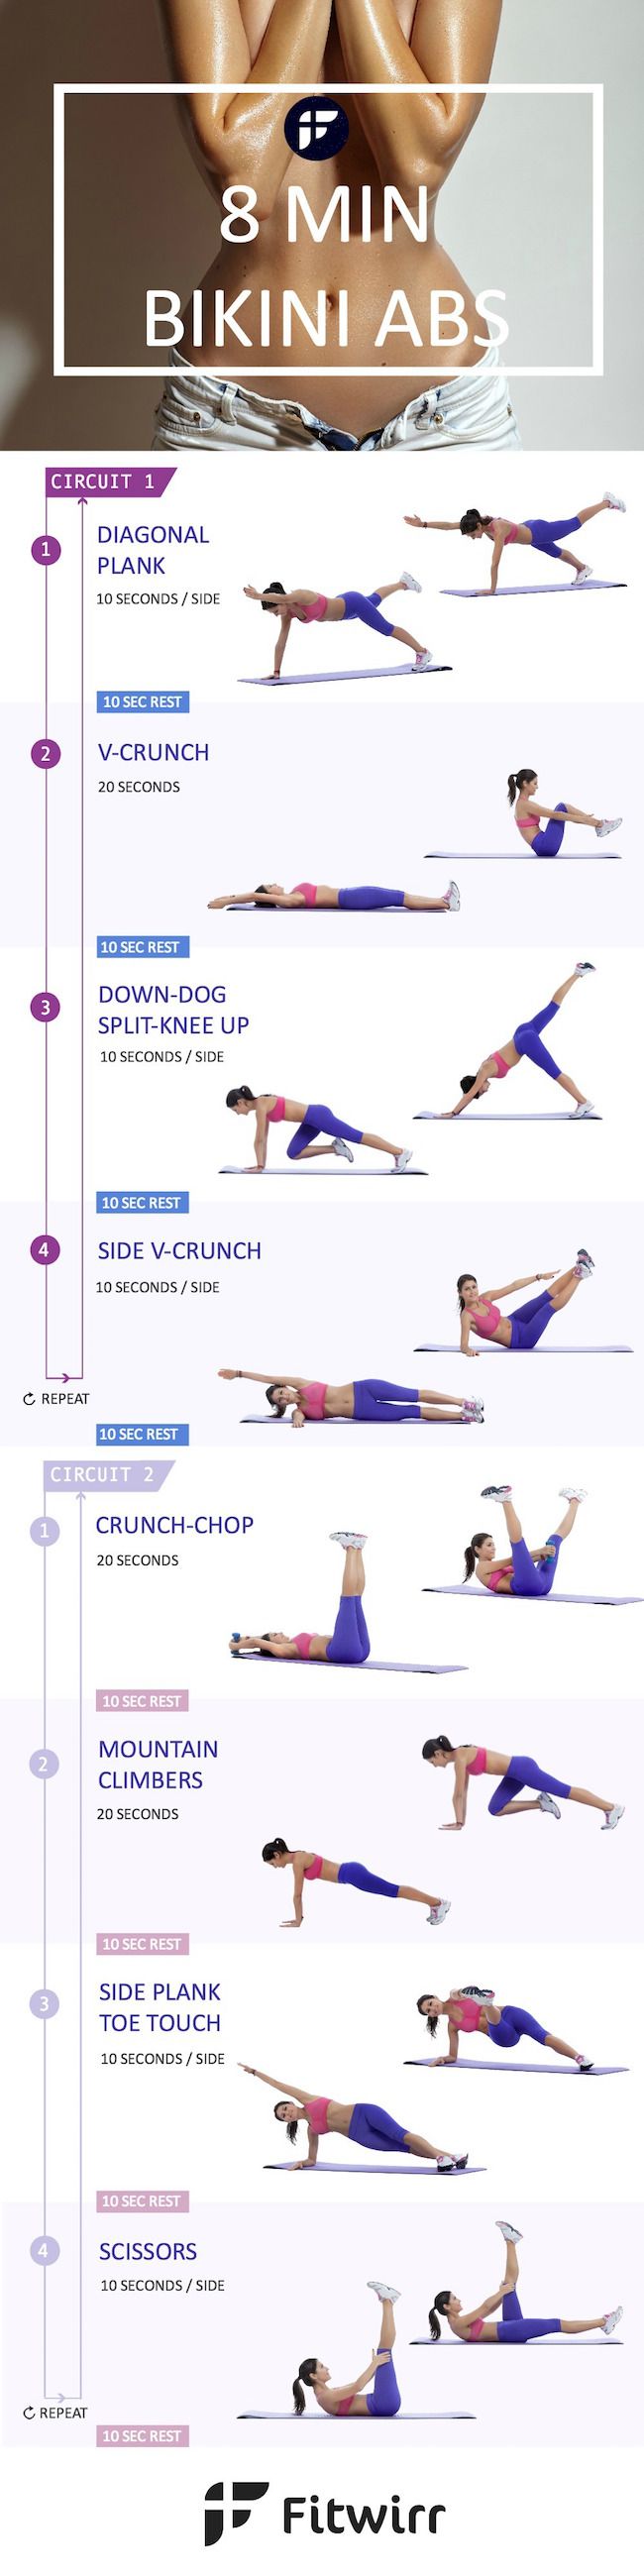 8 minute ab workout - we all have 8 minutes to work on our abs!